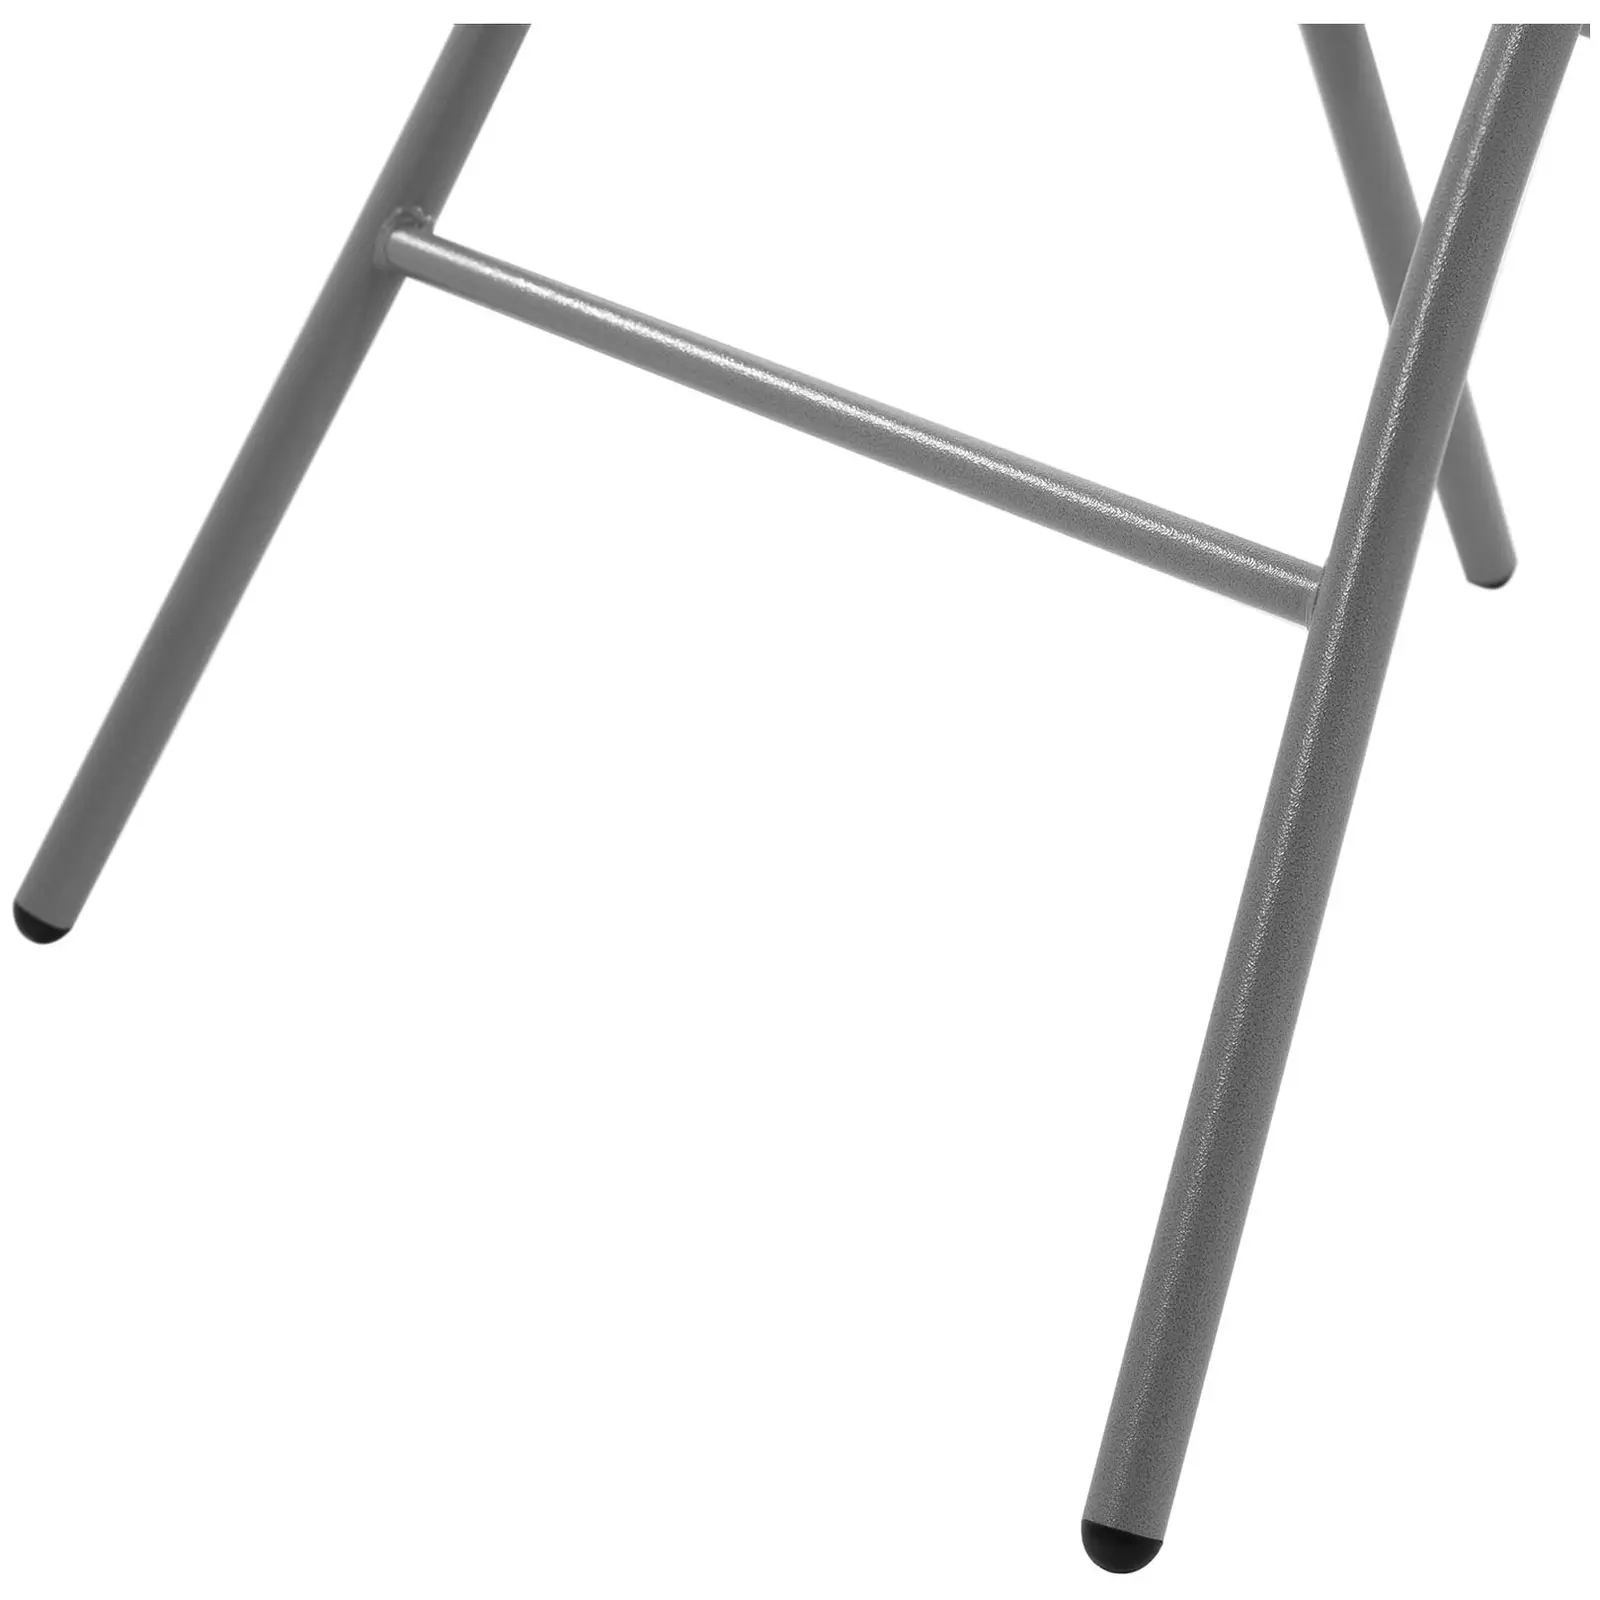 Folding Bar Table - ⌀ 800 x 1,100 mm - Royal Catering - 100 kg - indoor/outdoor - White